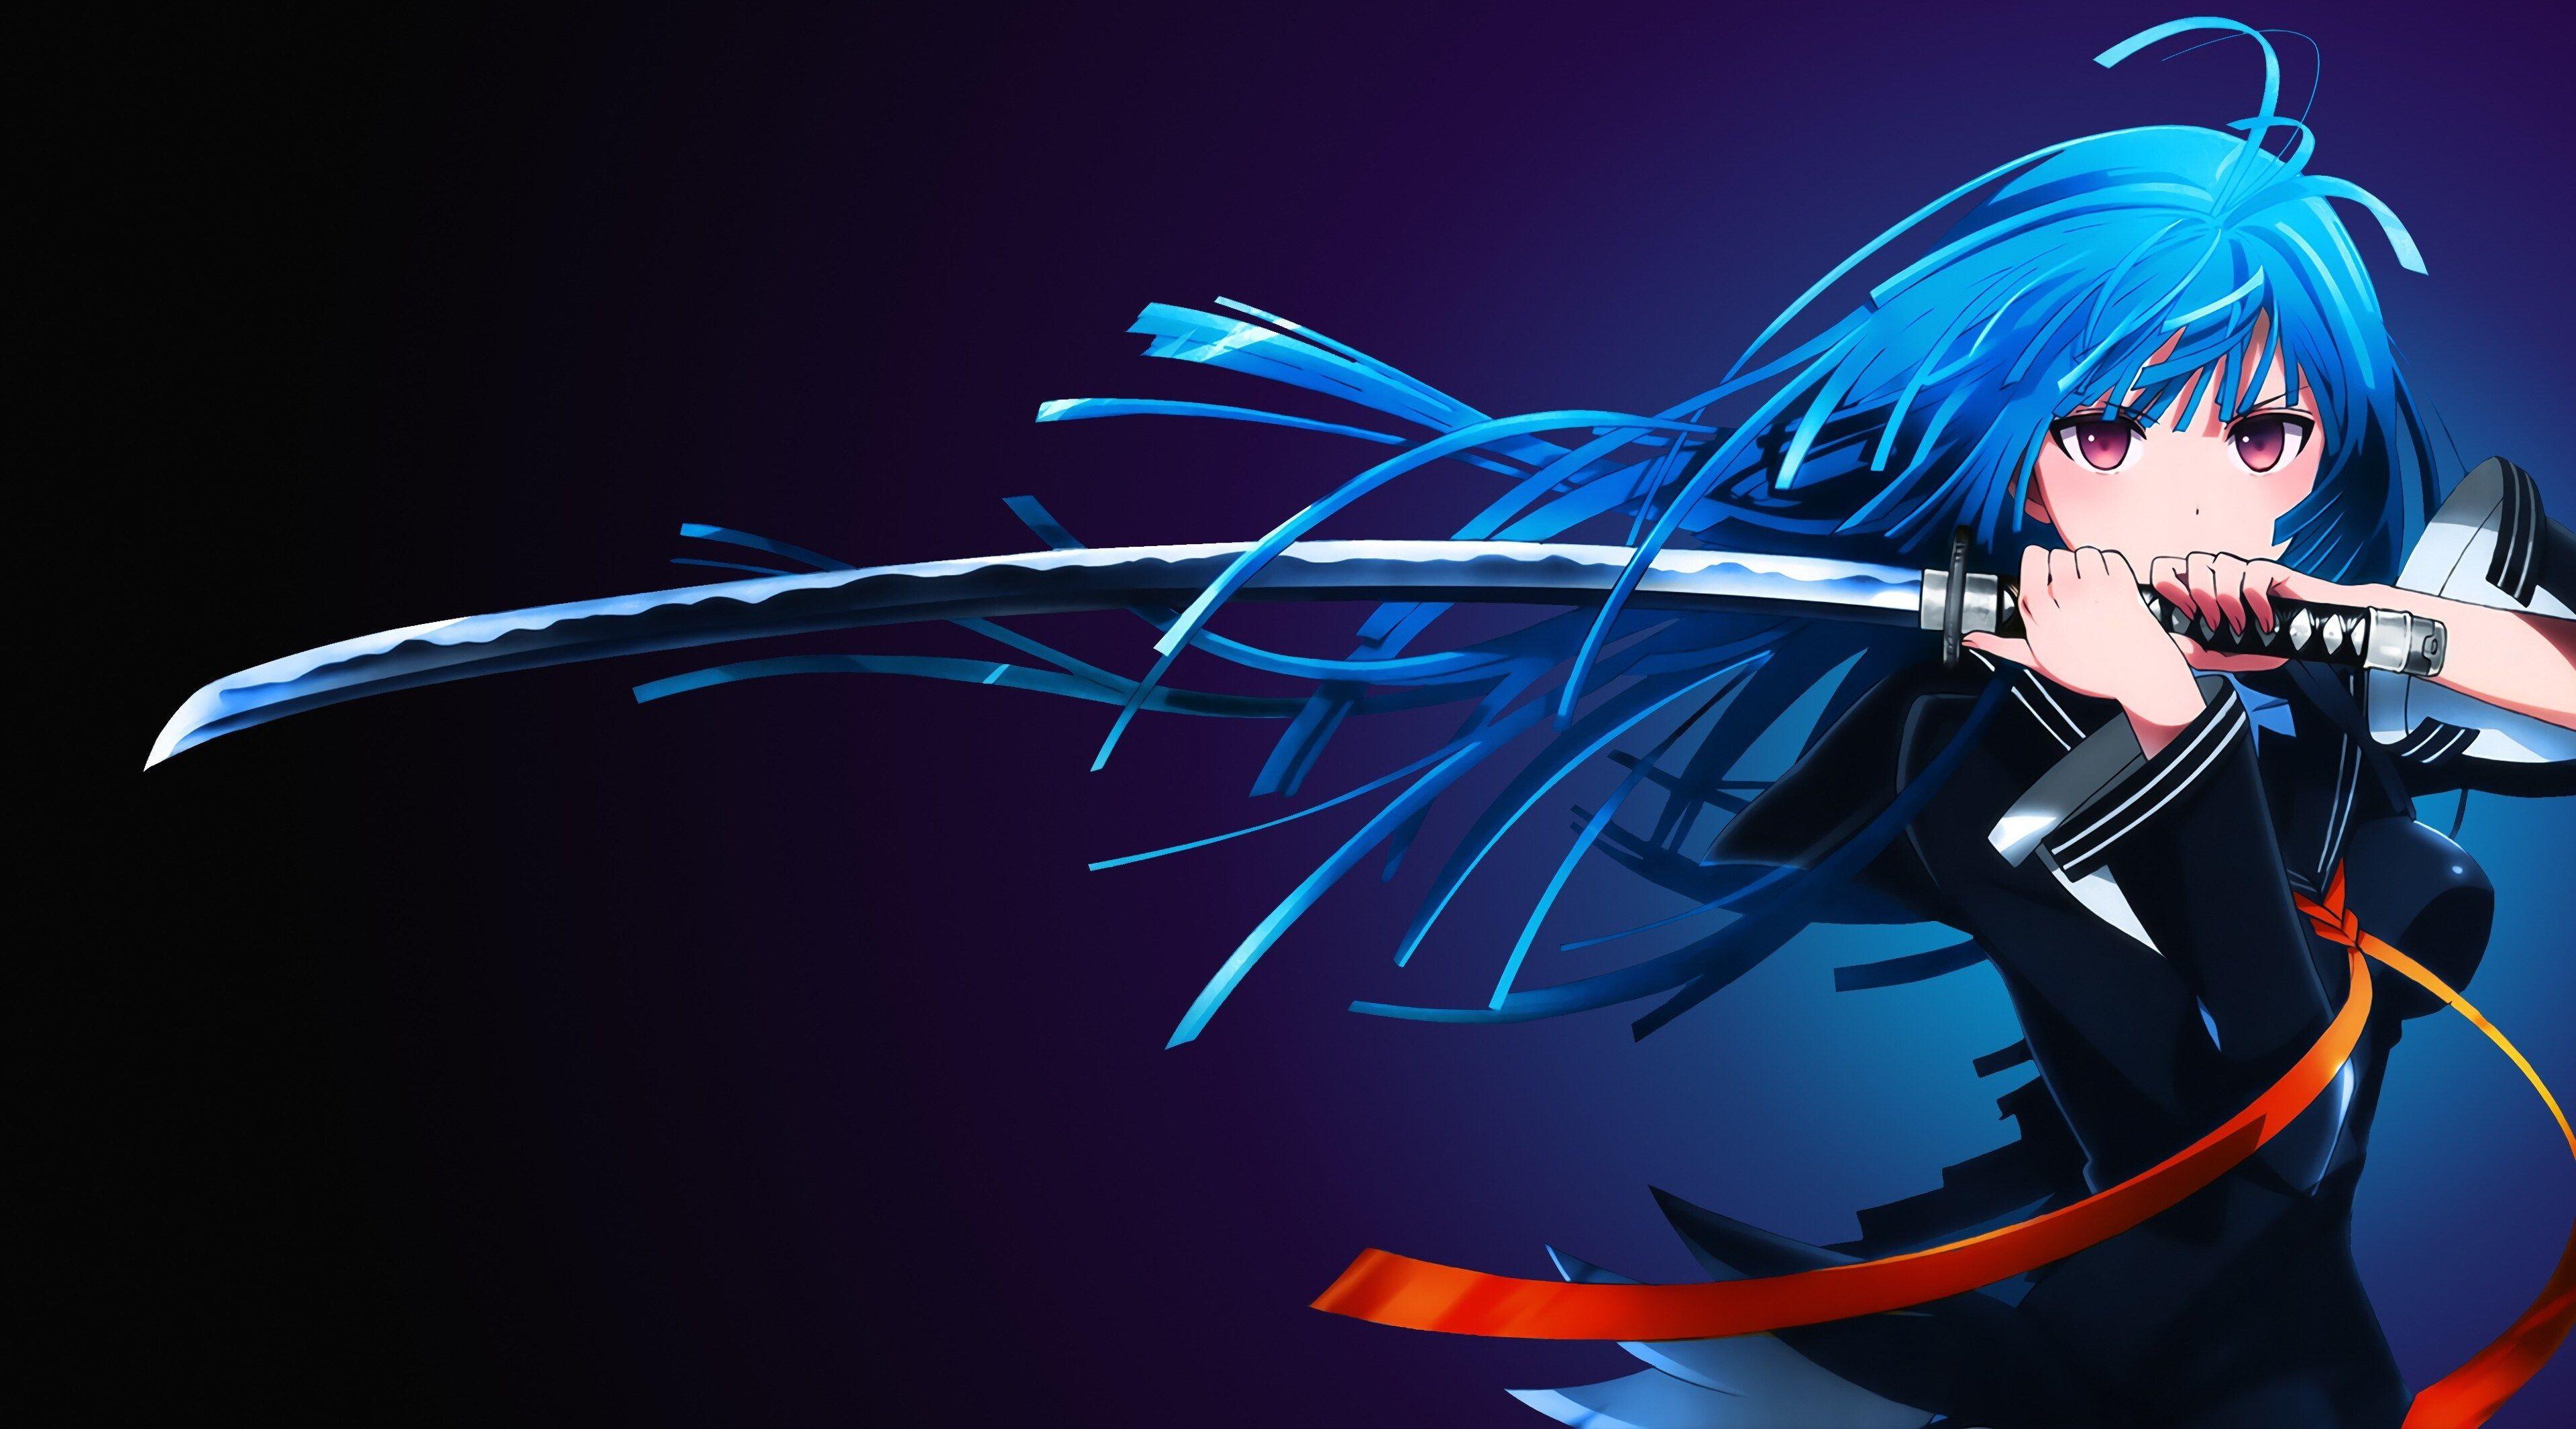 Anime 4k Wallpapers and Backgrounds 3840x2160: The Best Free Pictures and  Images | Wallspic